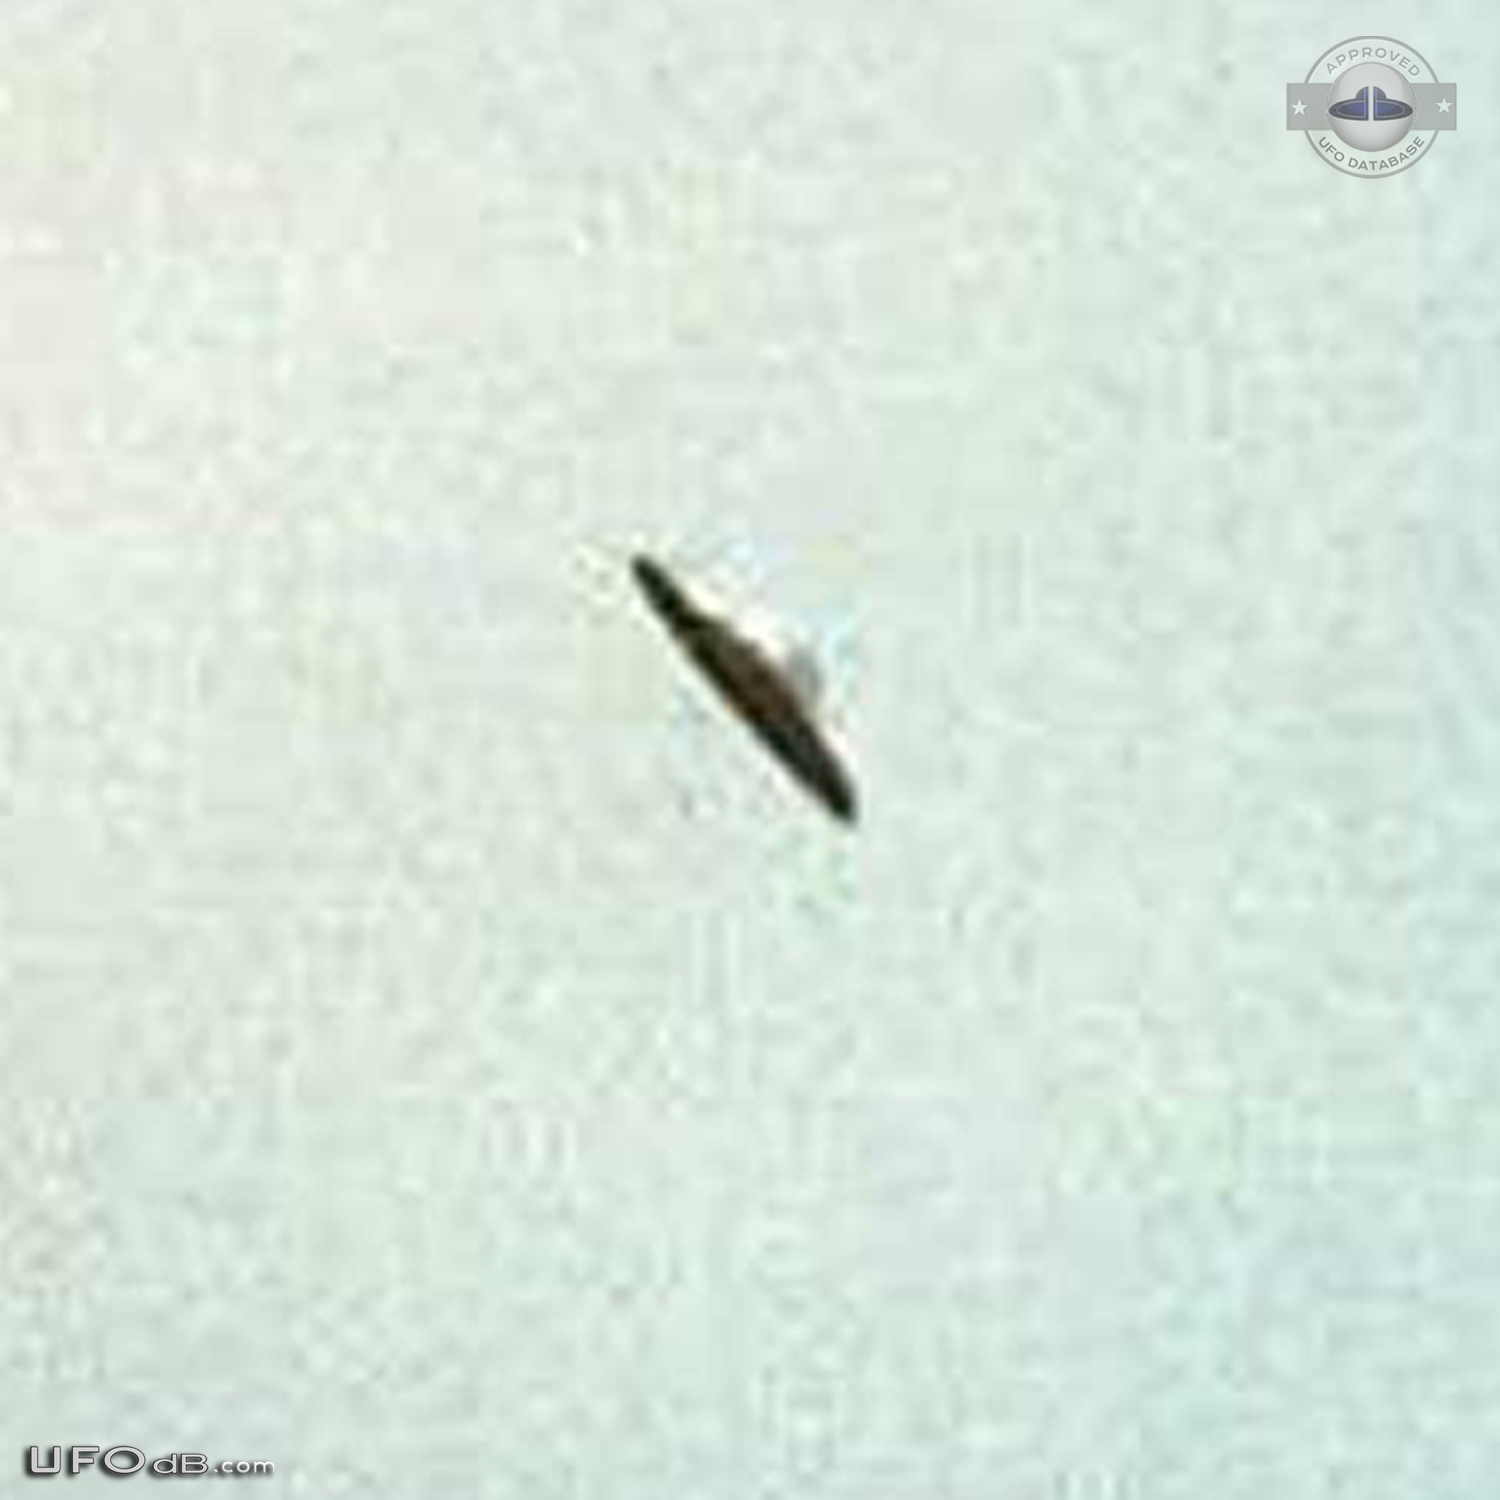 1967 Peru UFO sighting caught on pictures Huaylas Valley Yungay Ancash UFO Picture #440-3